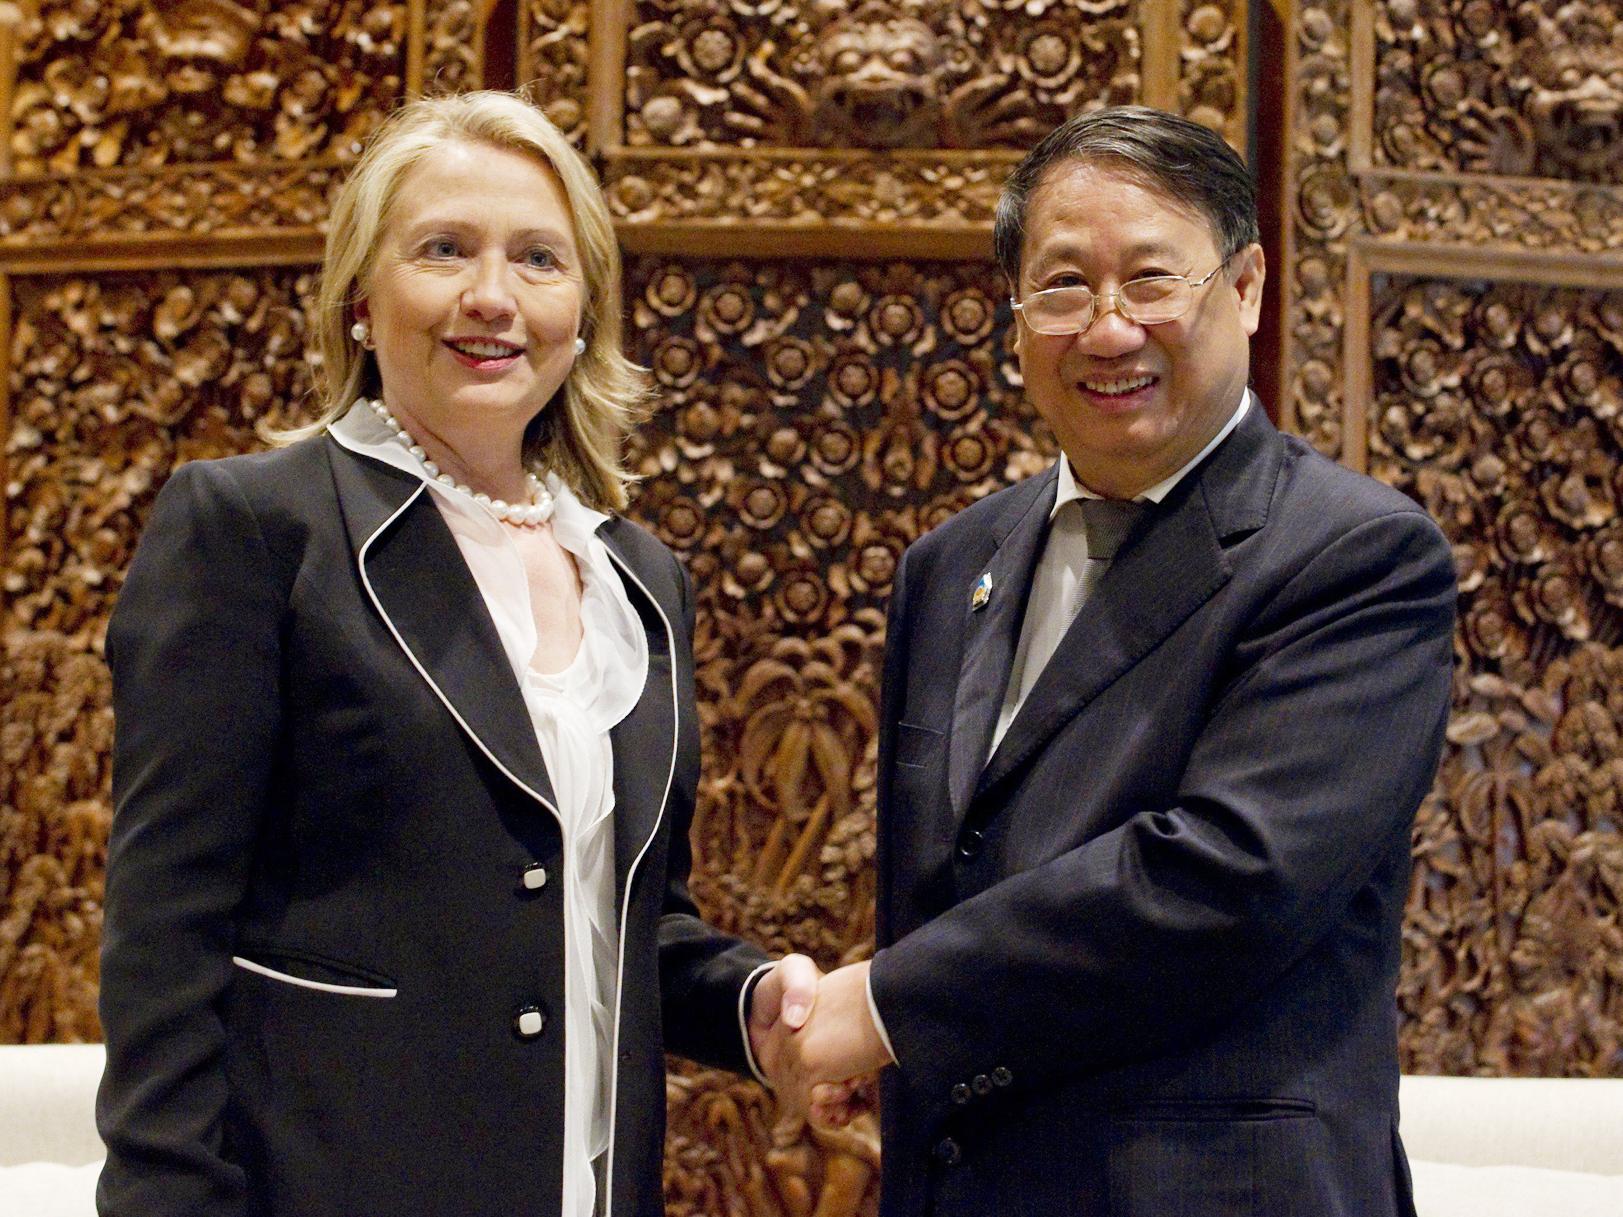  Deputy Prime Minister and Foreign Minister Pham Gia Khiem met with US Secretary of State Hillary Clinton